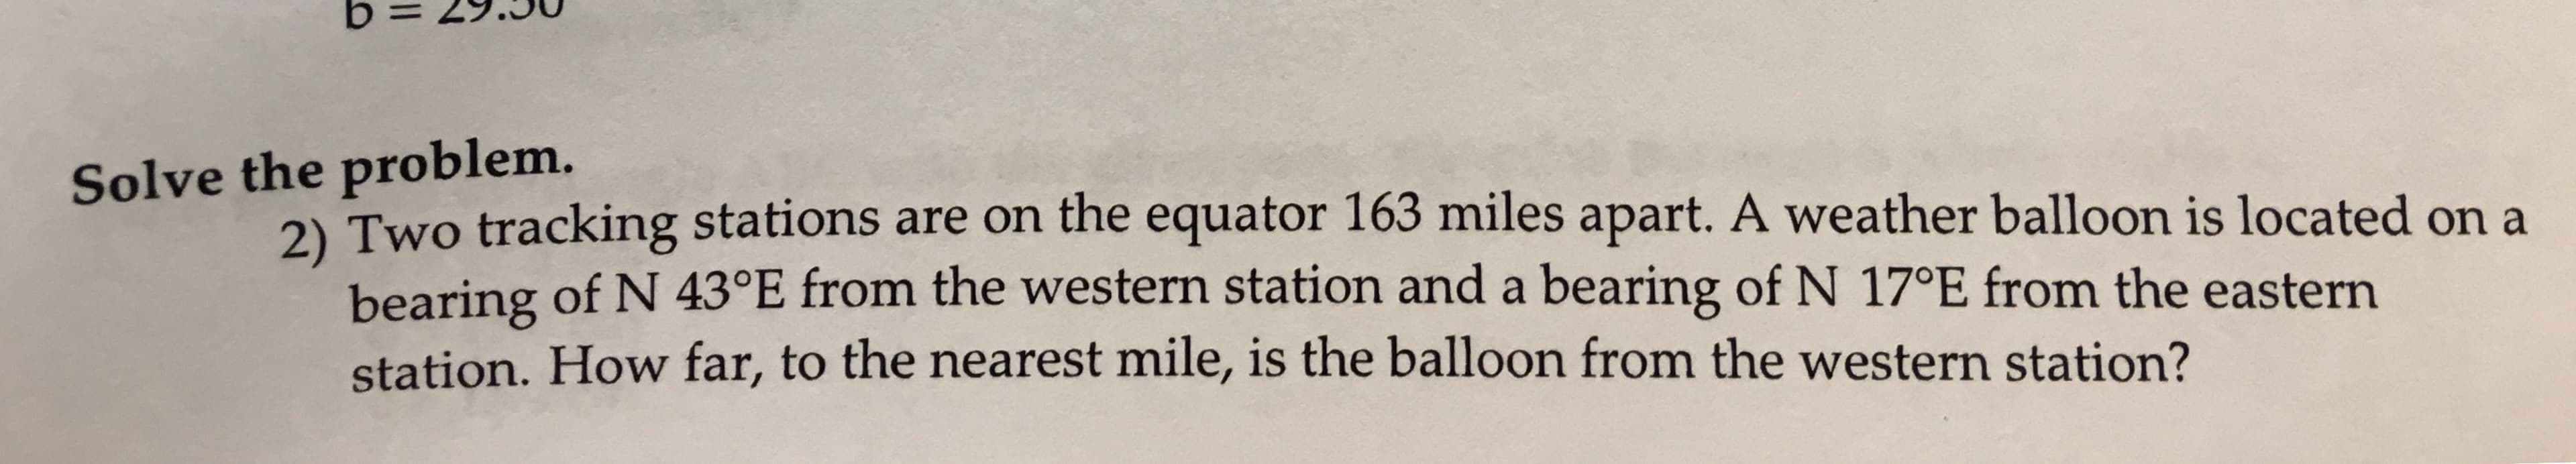 Solve the problem.
2) Two tracking stations are on the equator 163 miles apart. A weather balloon is located on a
bearing of N 43°E from the western station and a bearing of N 17°E from the eastern
station. How far, to the nearest mile, is the balloon from the western station?
